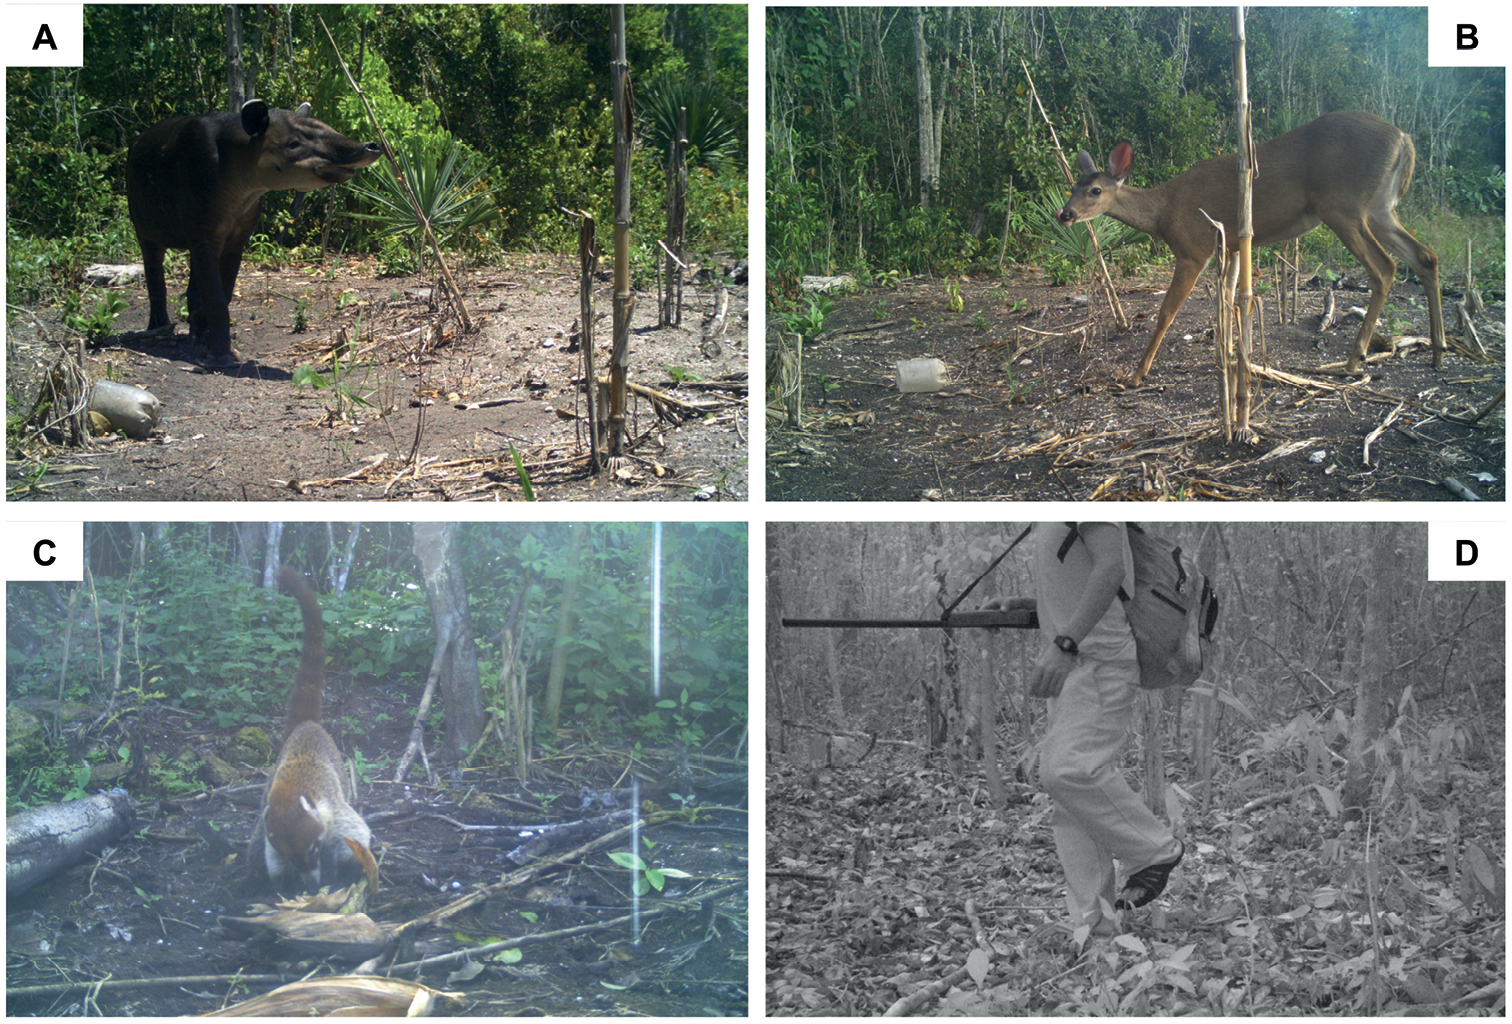 Human-wildlife conflicts and drought in the greater Calakmul Region,  Mexico: implications for tapir conservation